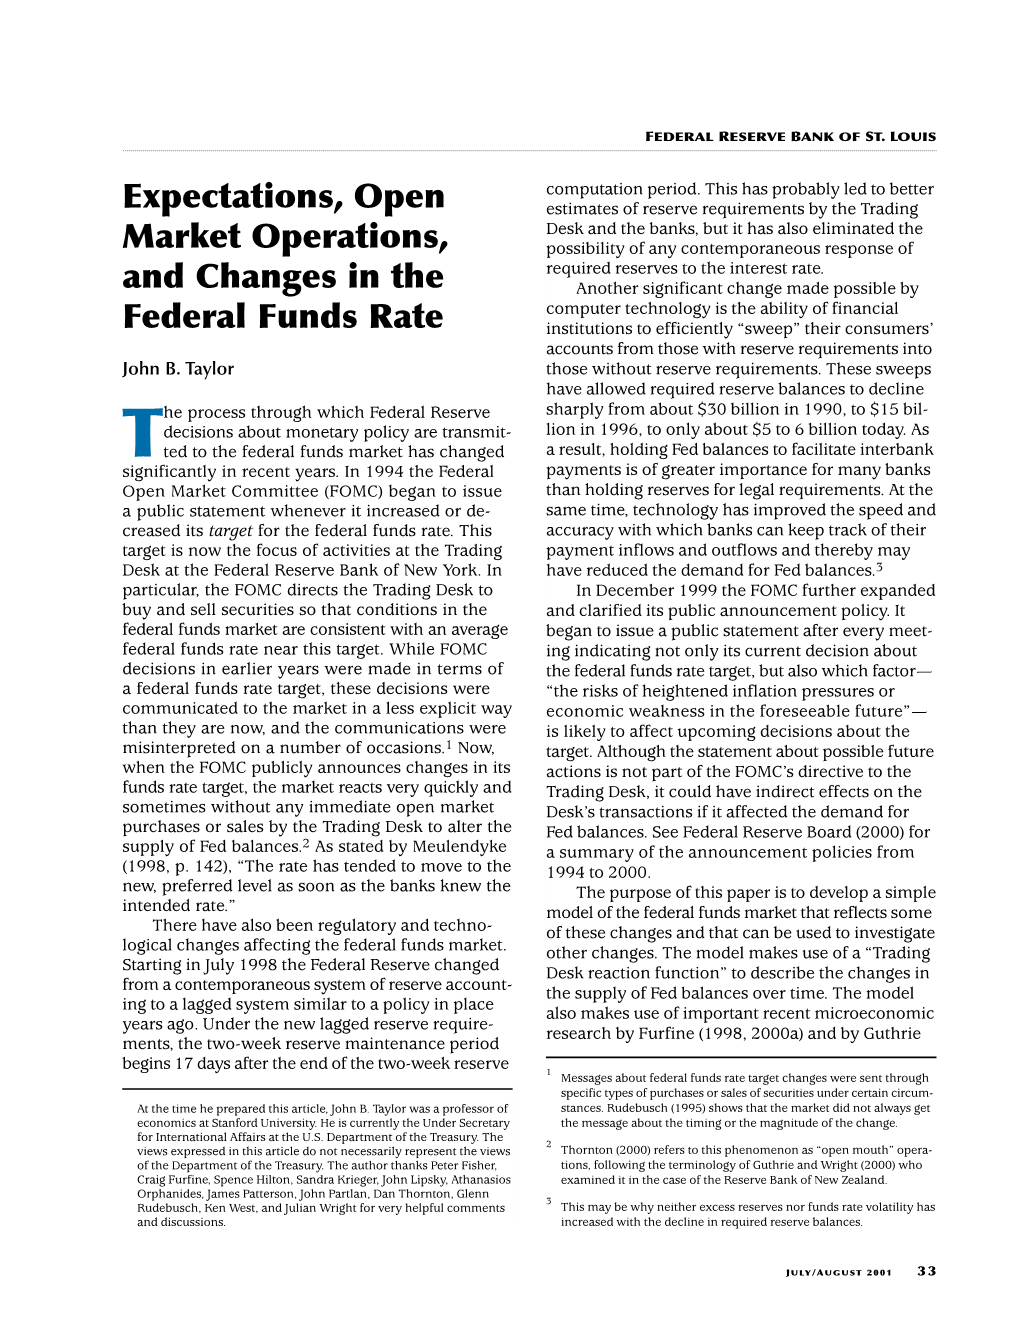 Expectations, Open Market Operations, and Changes in the Federal